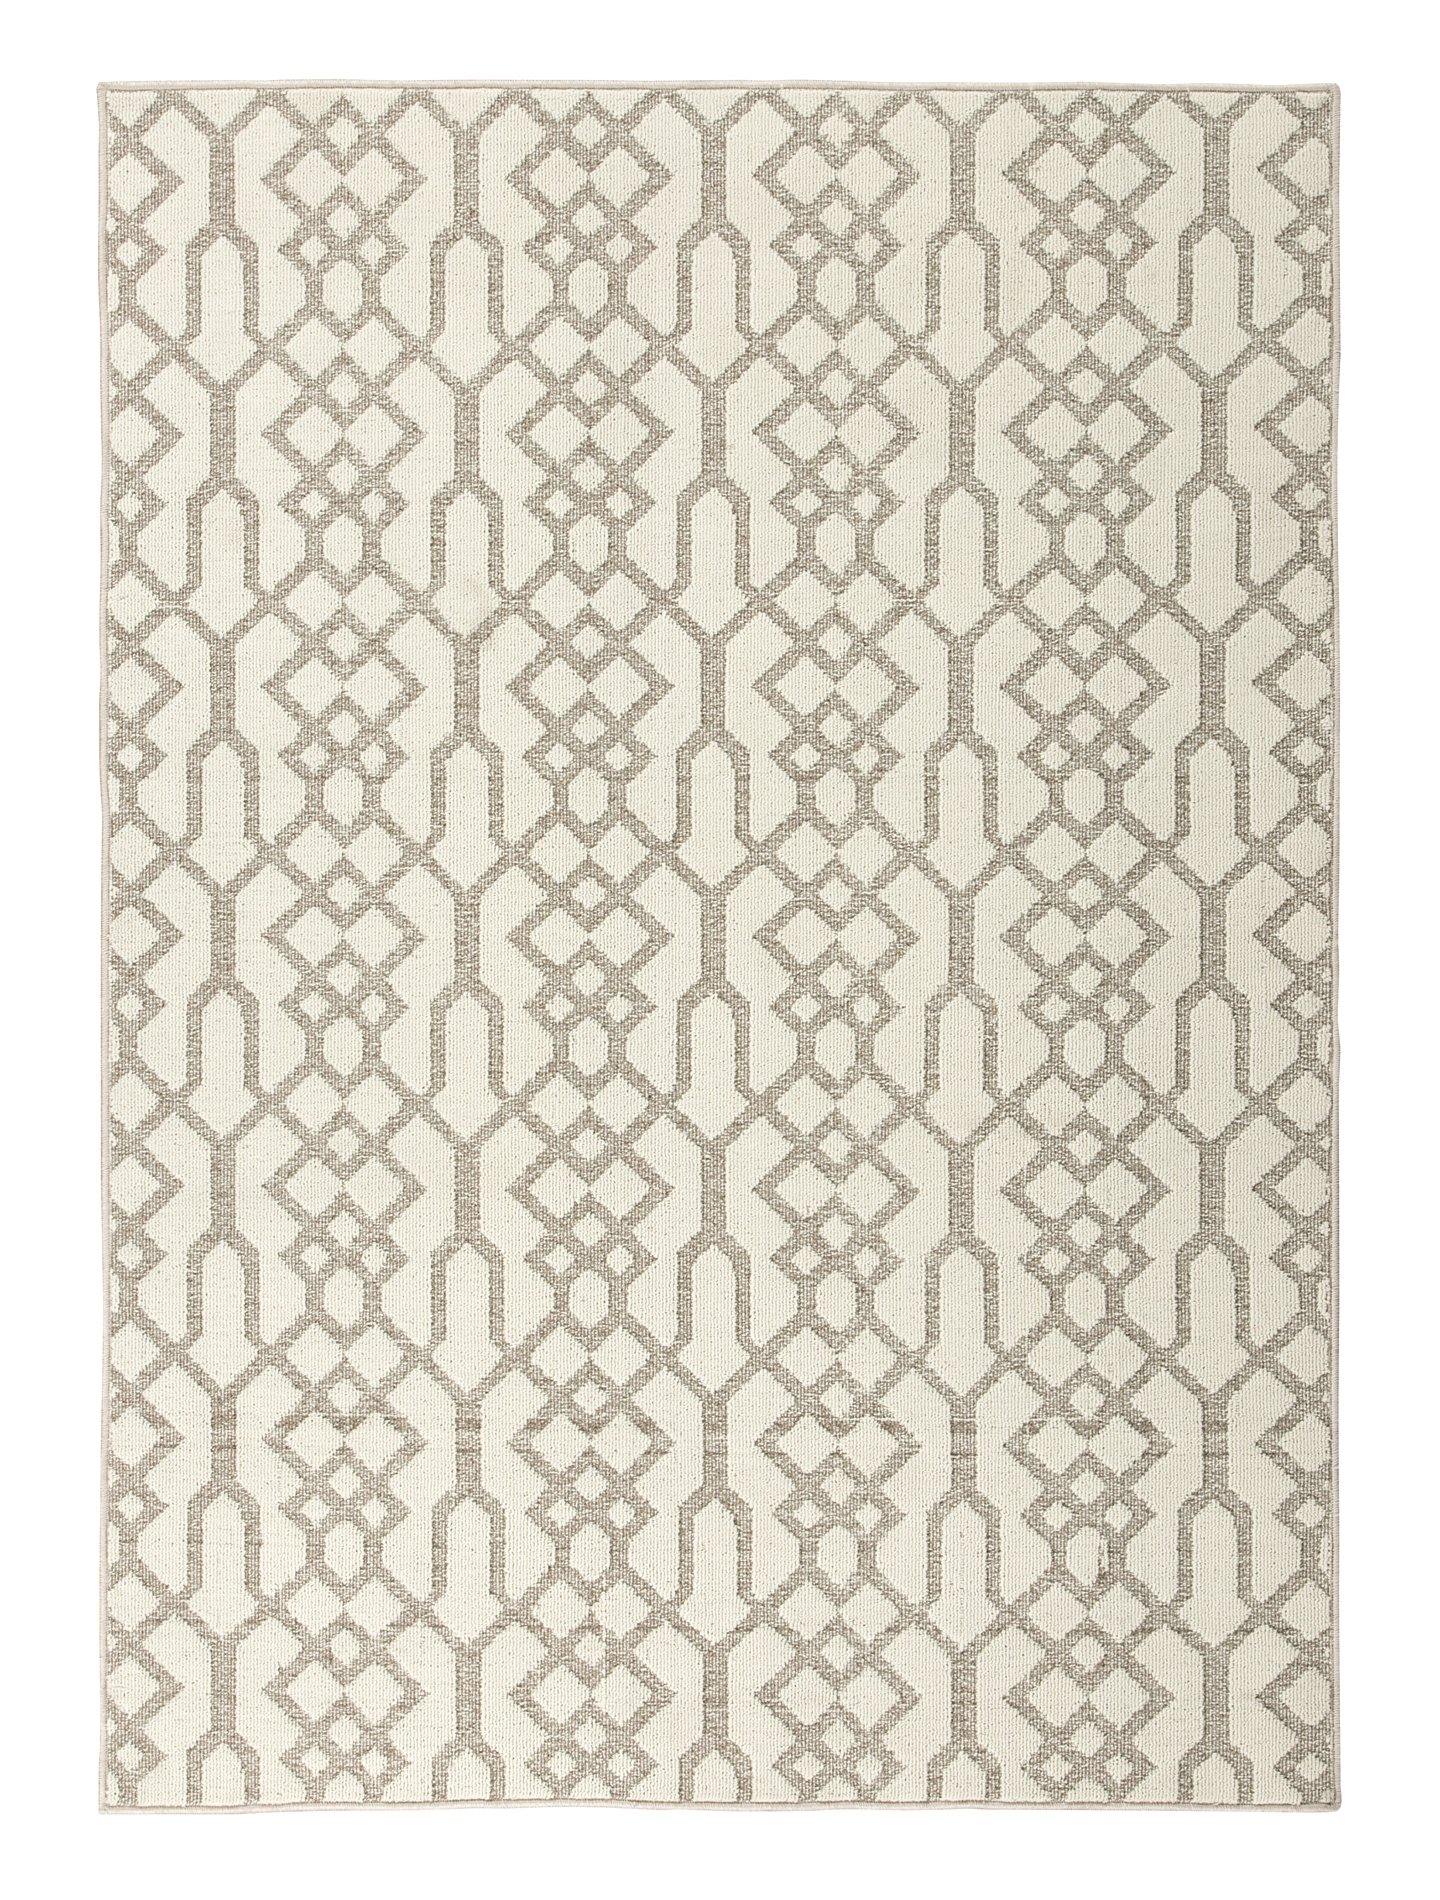 Coulee 8 x 10 Rug R402541 Area Rugs By ashley - sofafair.com